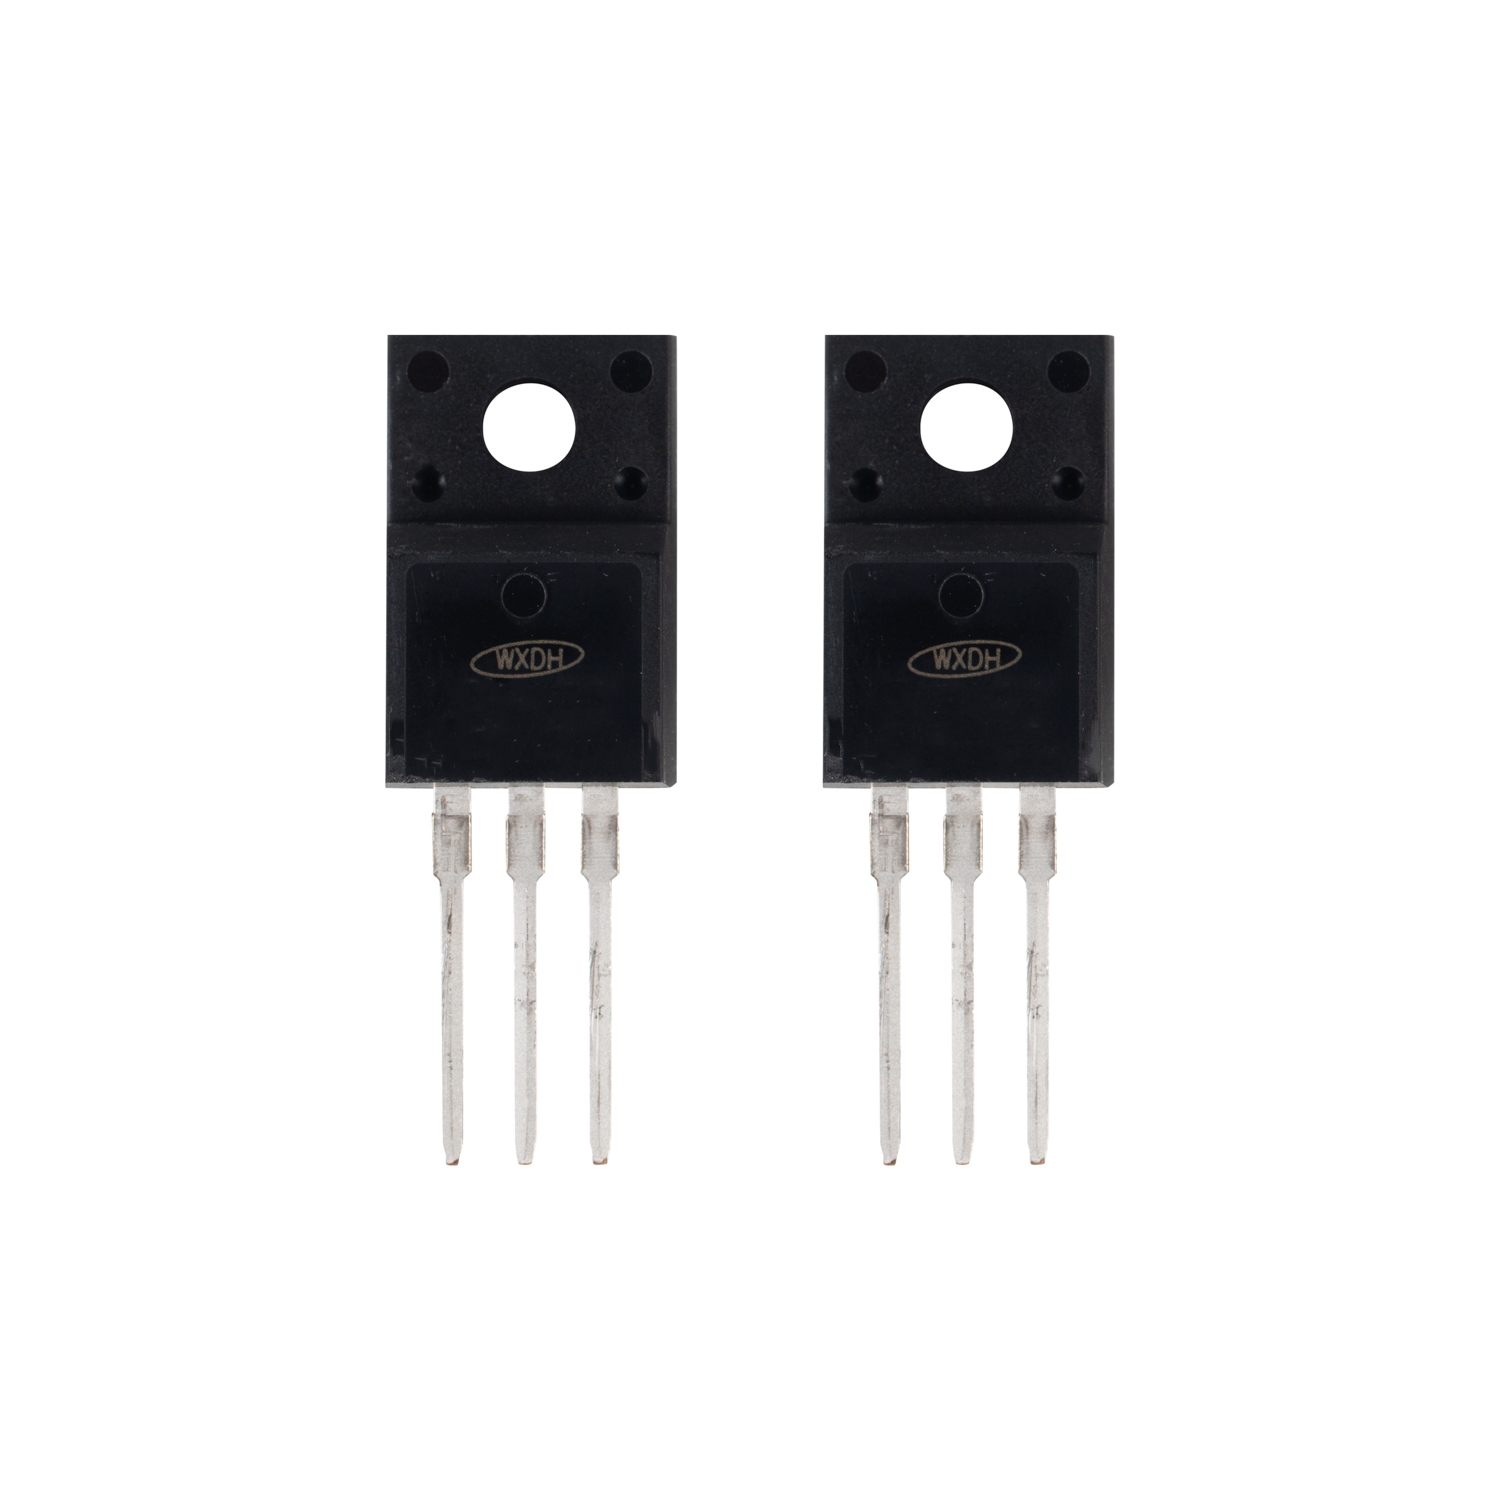 33A 60V N-channel Enhancement Mode Power MOSFET